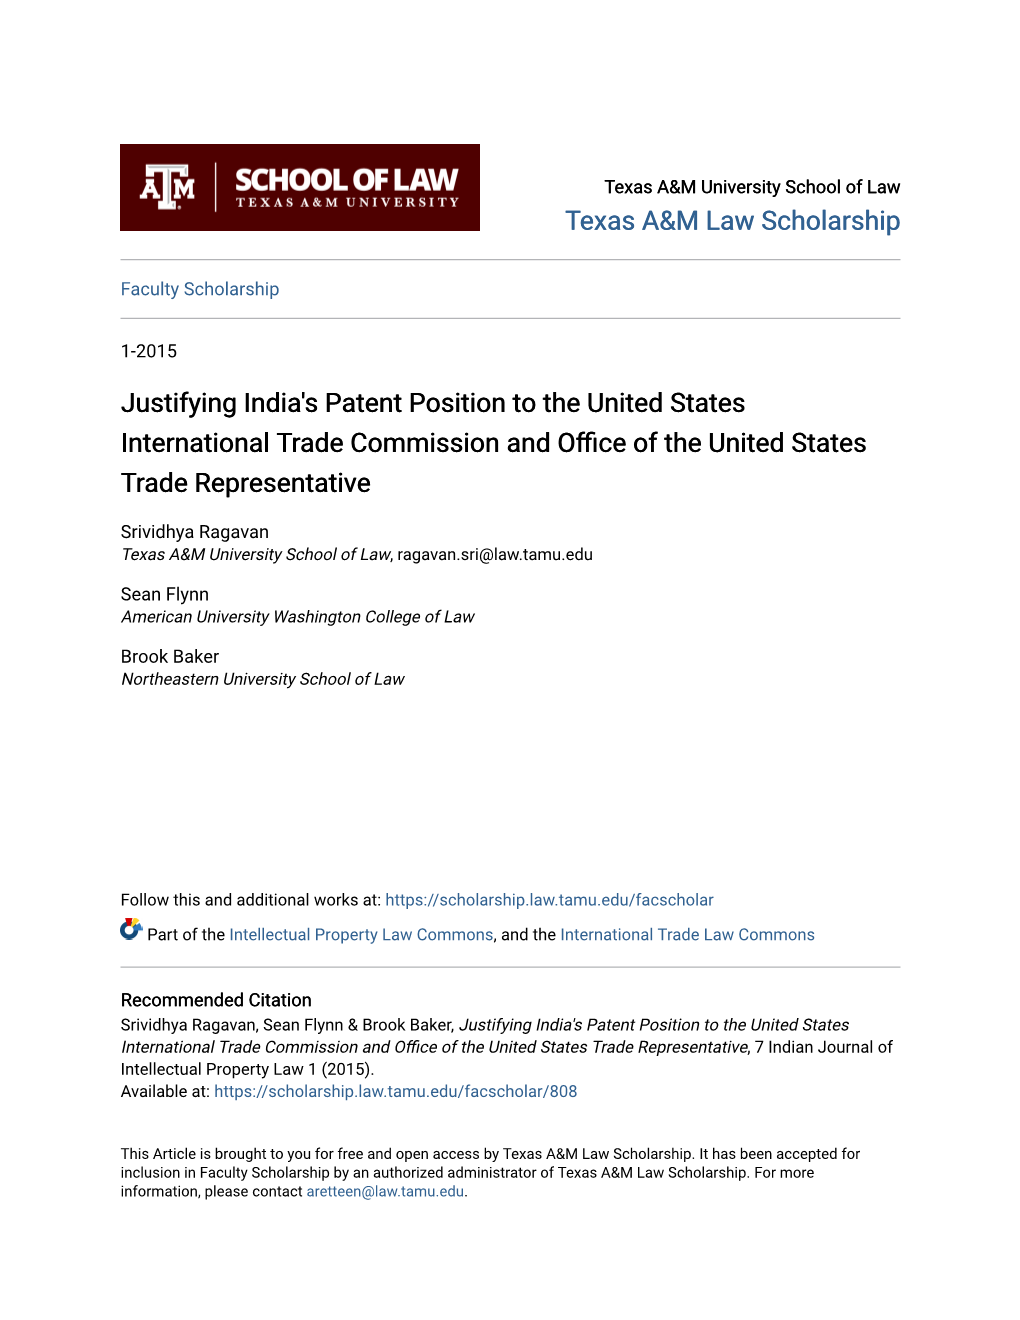 Justifying India's Patent Position to the United States International Trade Commission and Office of the United States Trade Representative